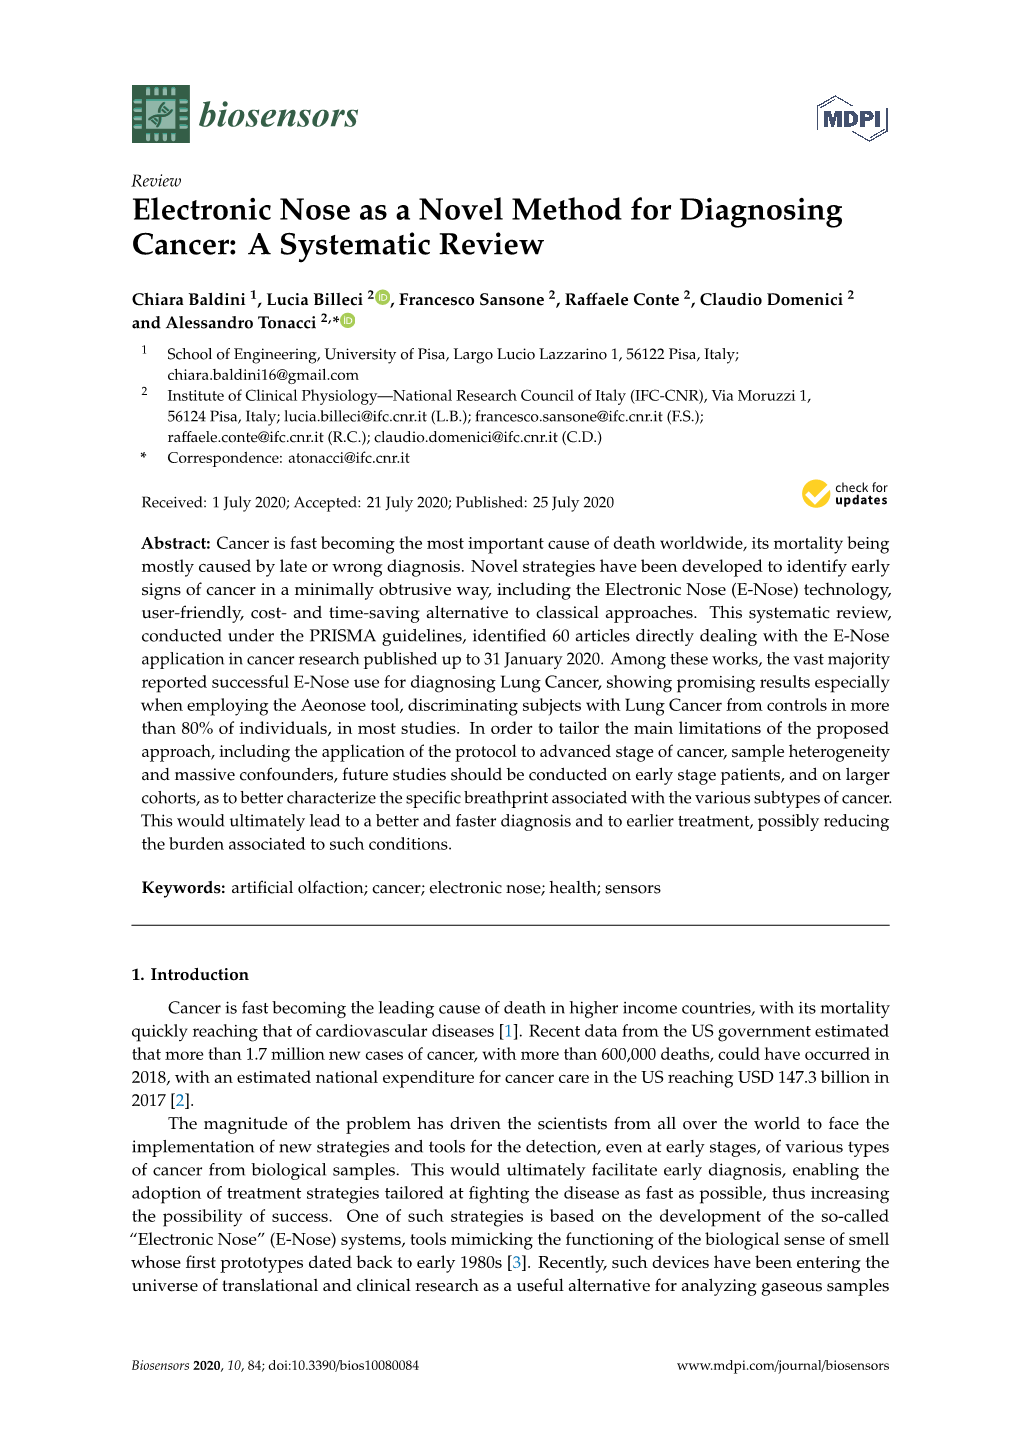 Electronic Nose As a Novel Method for Diagnosing Cancer: a Systematic Review